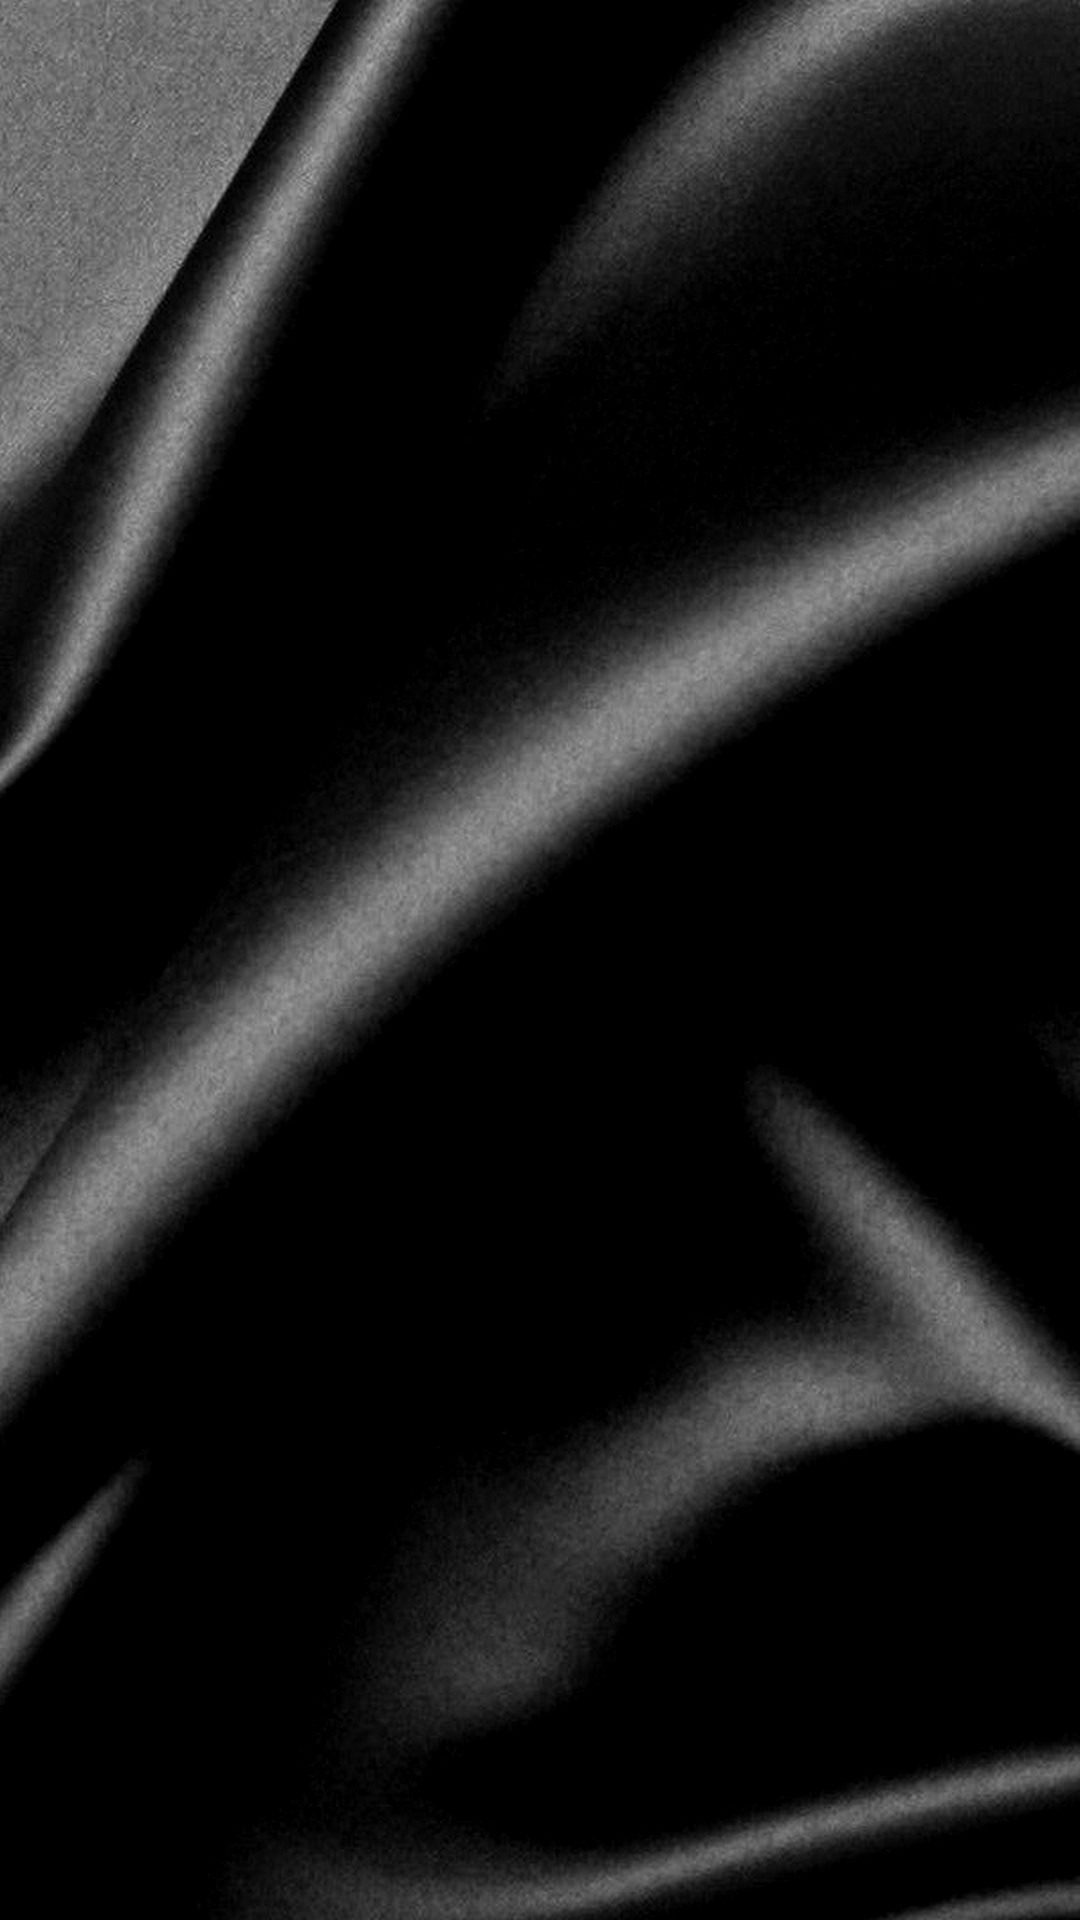 Black Silk iPhone Wallpaper Tumblr With high-resolution 1920X1080 pixel. You can set as wallpaper for Apple iPhone X, XS Max, XR, 8, 7, 6, SE, iPad. Enjoy and share your favorite HD wallpapers and background images